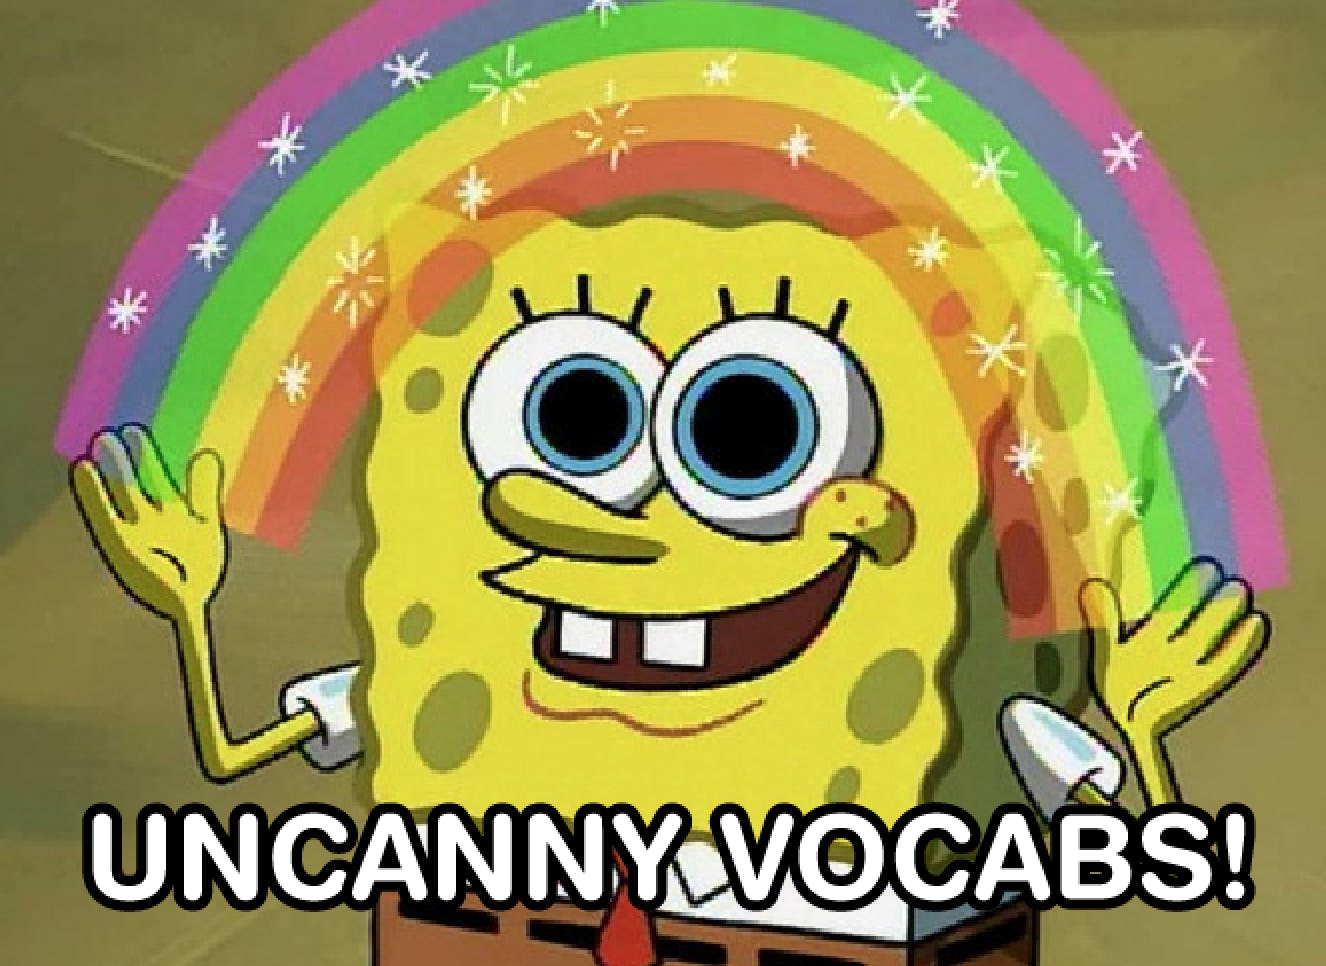 Static gif of cartoon character Spongebob Squarepants under a rainbow with text: “Uncanny Vocabs!”